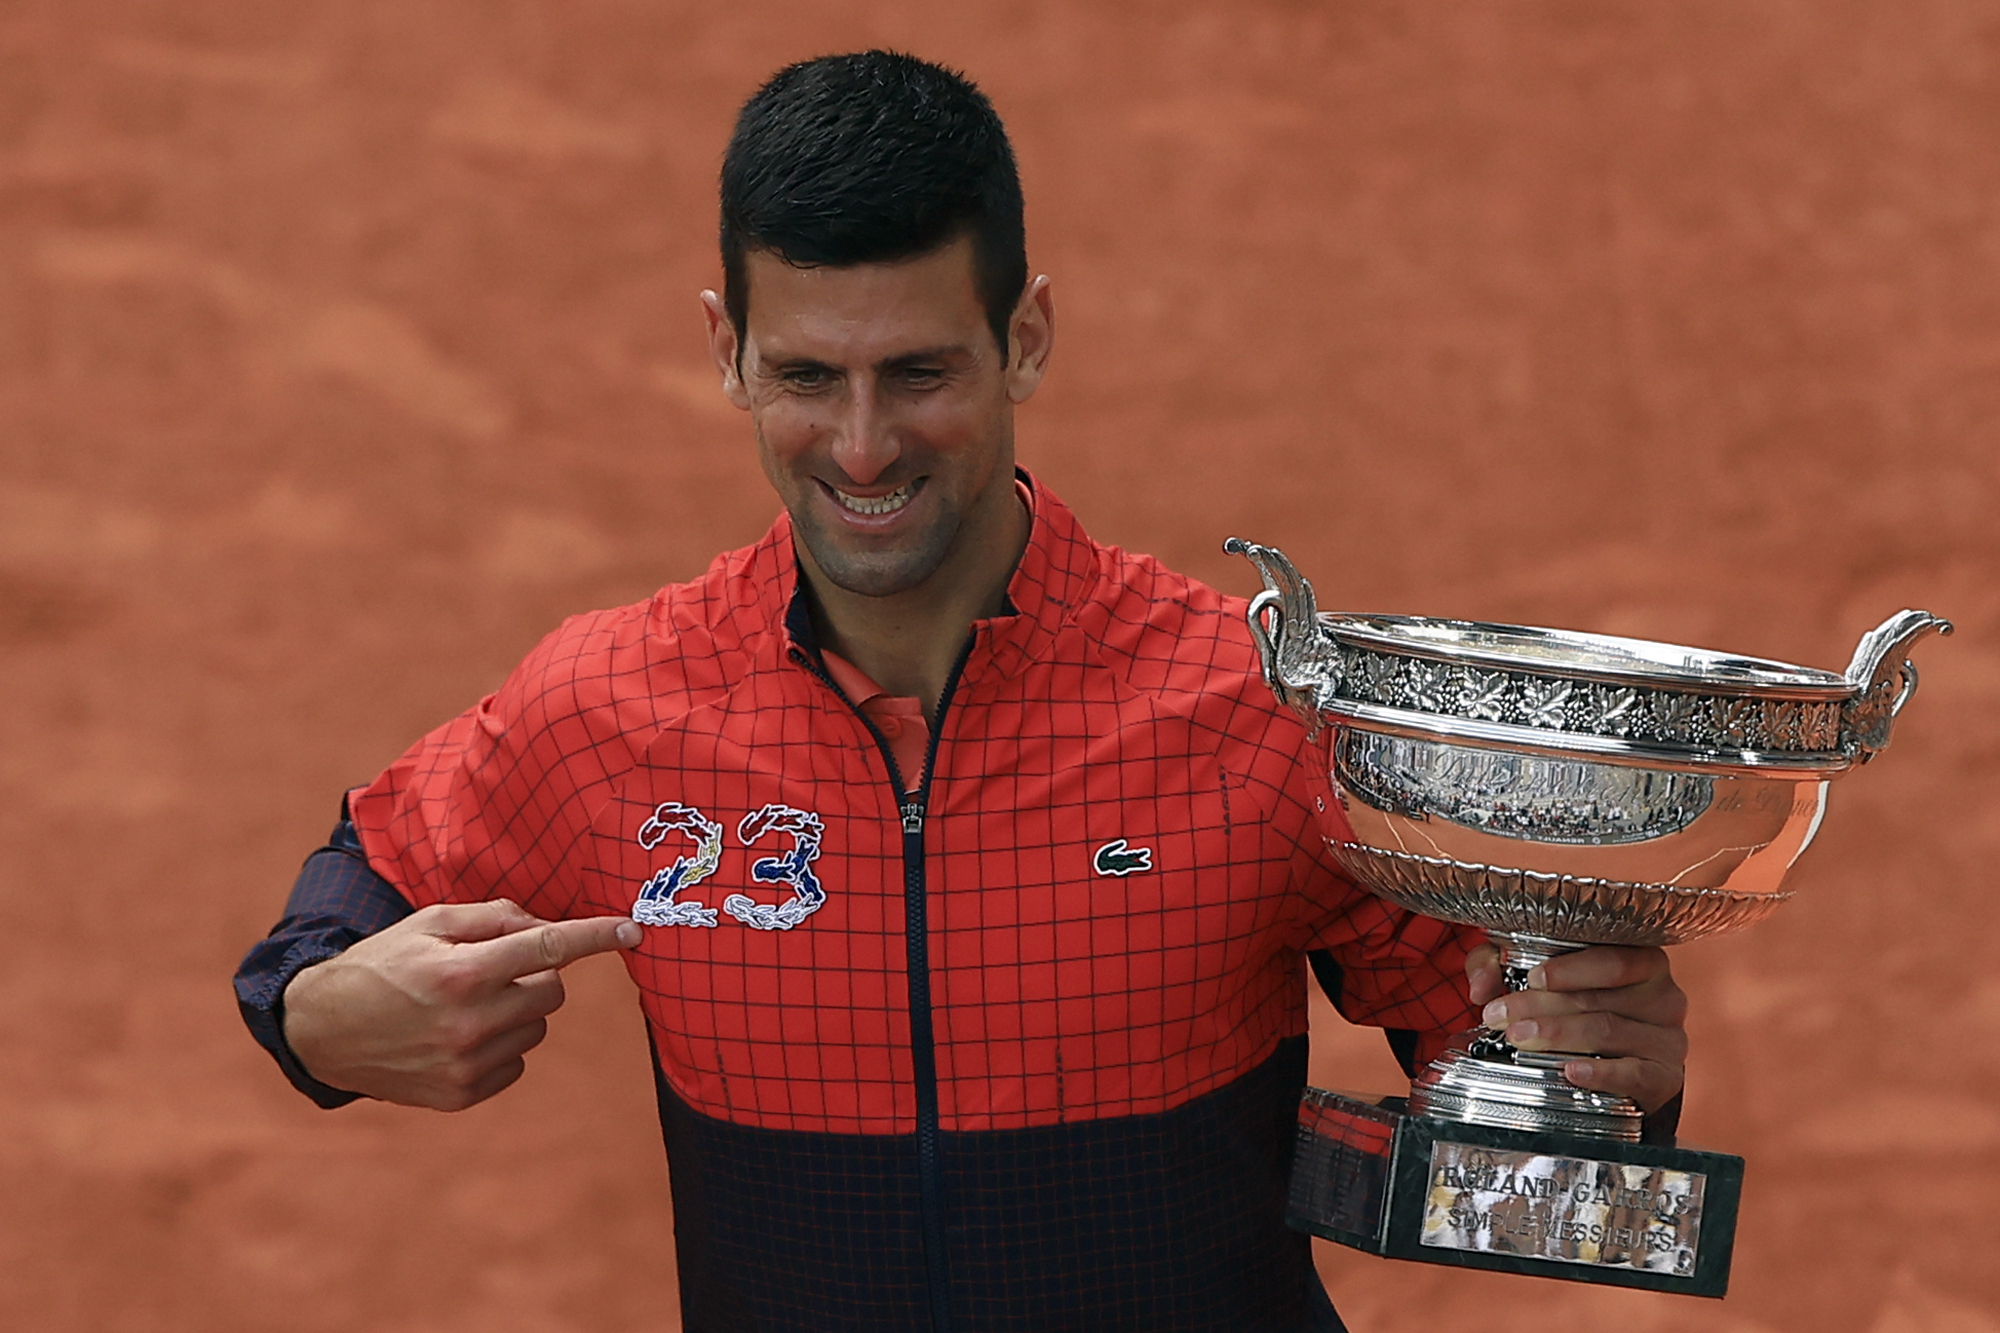 Serbia's Novak Djokovic holds the trophy as he celebrates winning the men's singles final match of the French Open tennis tournament against Norway's Casper Ruud in three sets, 7-6, (7-1), 6-3, 7-5, at the Roland Garros stadium in Paris, Sunday, June 11, 2023. Djokovic won his record 23rd Grand Slam singles title, breaking a tie with Rafael Nadal for the most by a man.